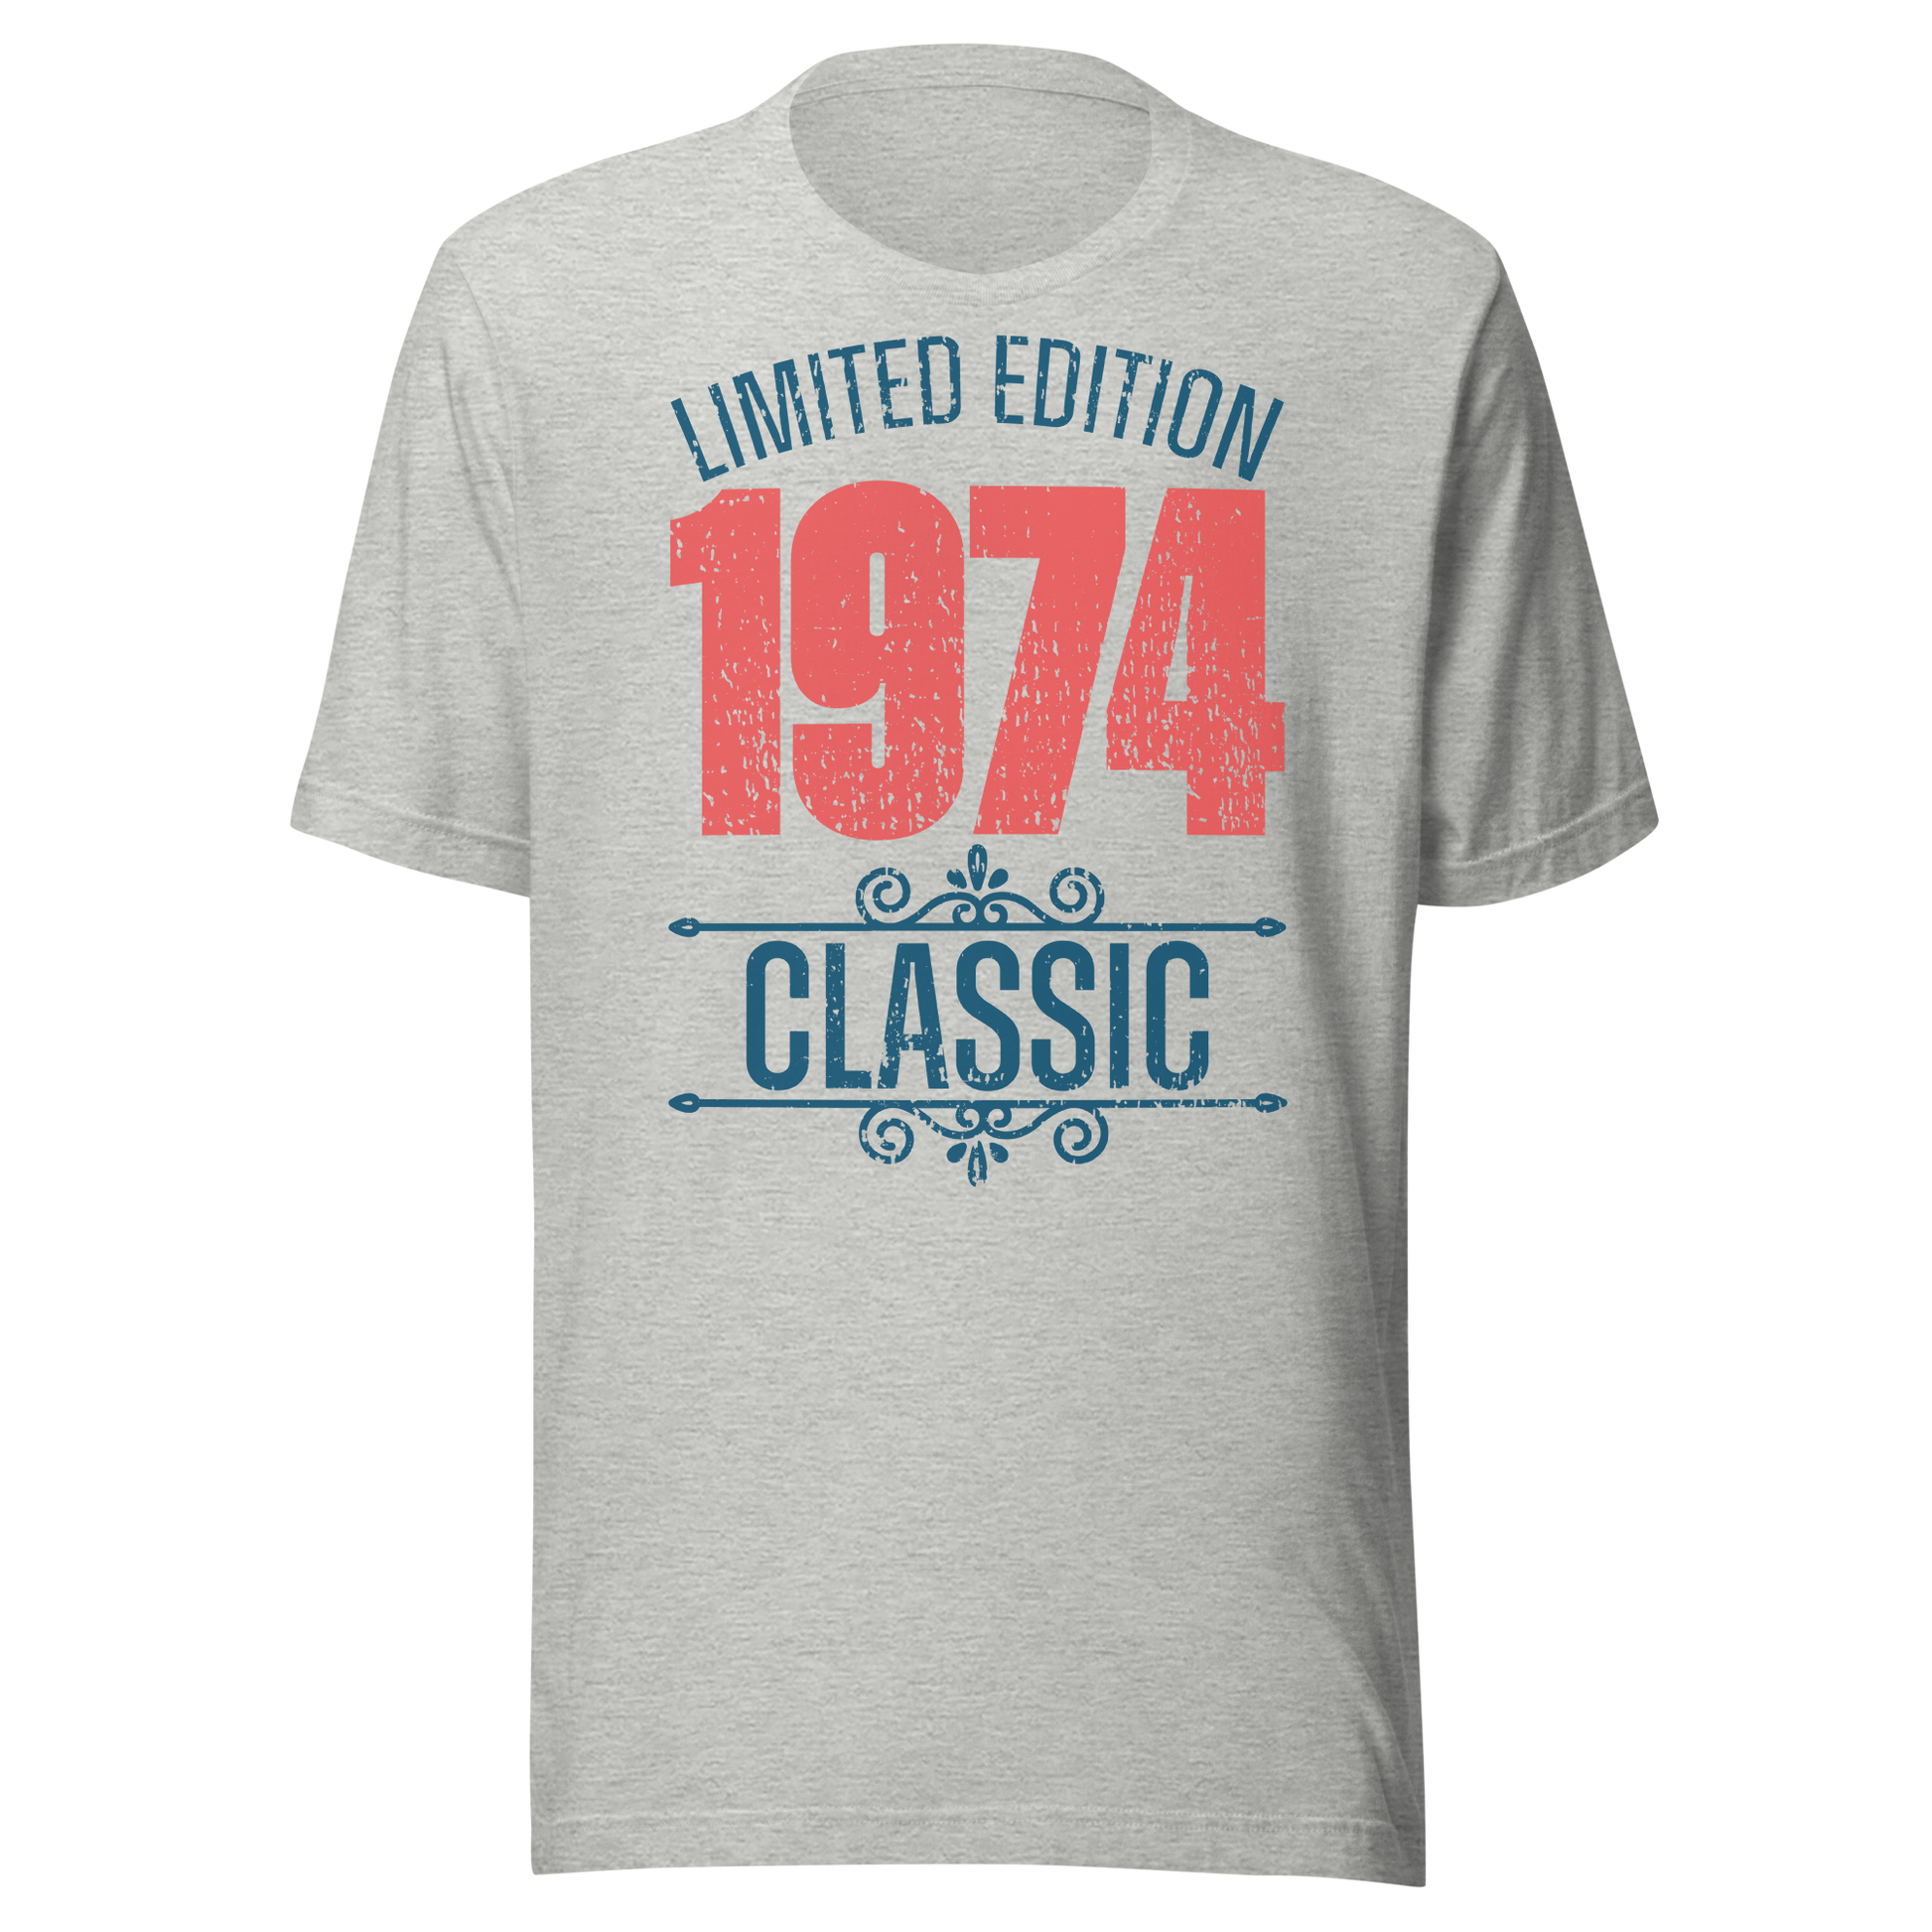 Retro Unisex T-Shirt - Limited Edition 1974 Classic Ghost Front